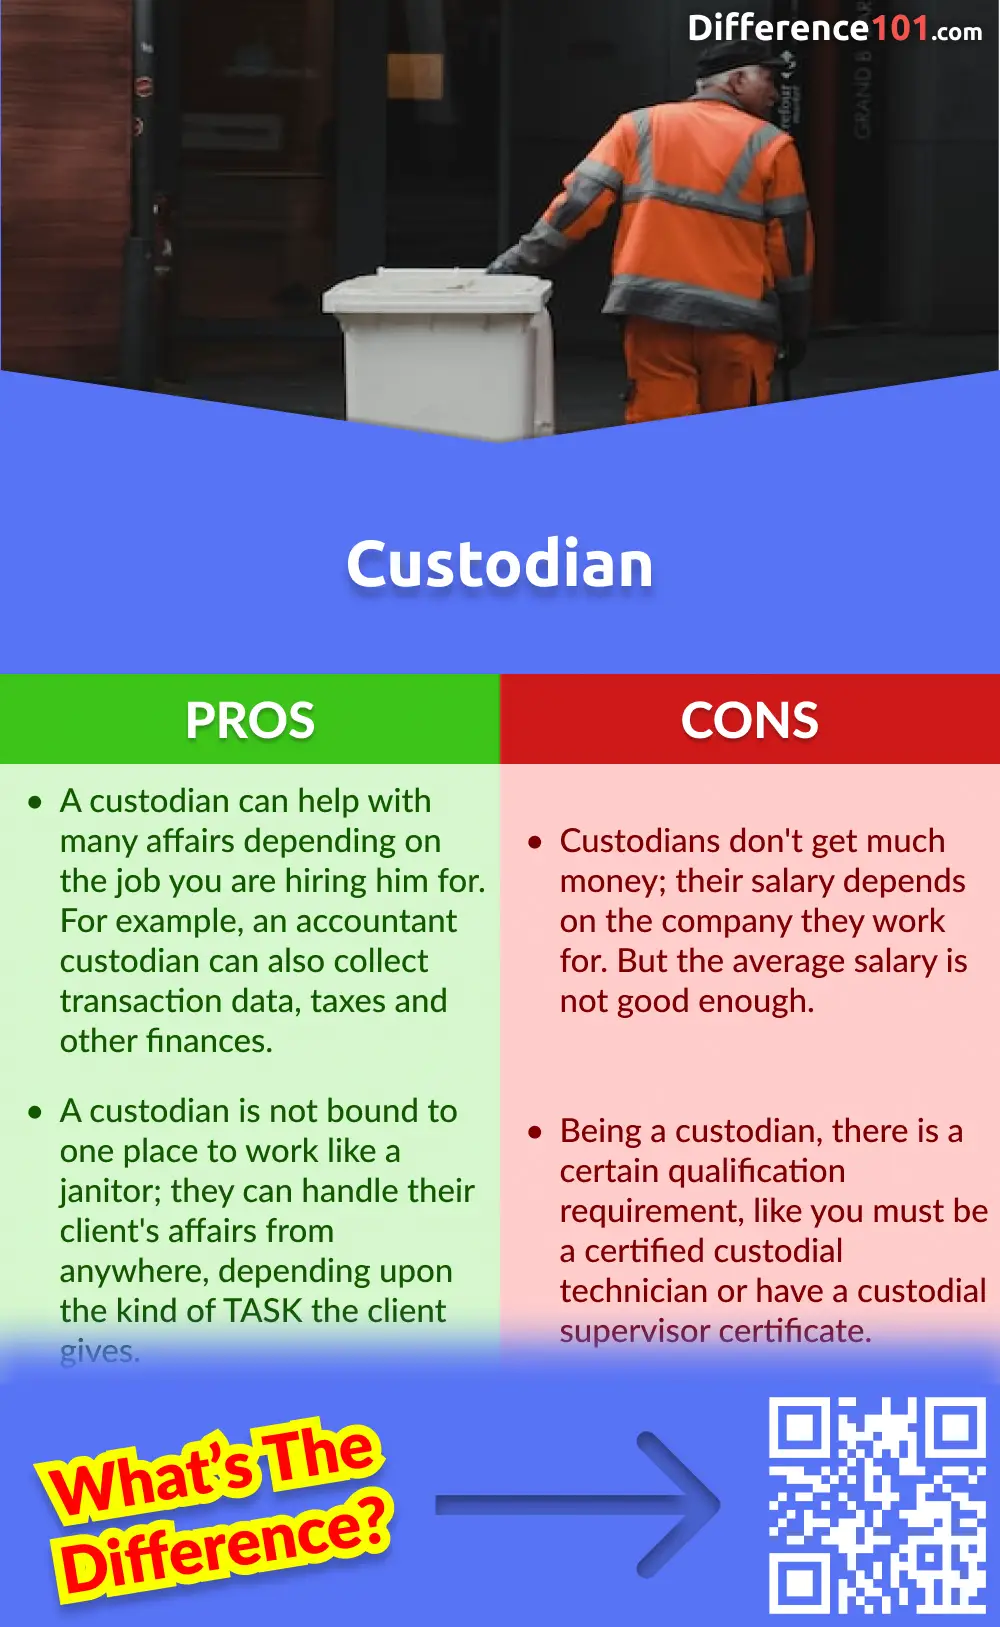 Custodian Pros and Cons
